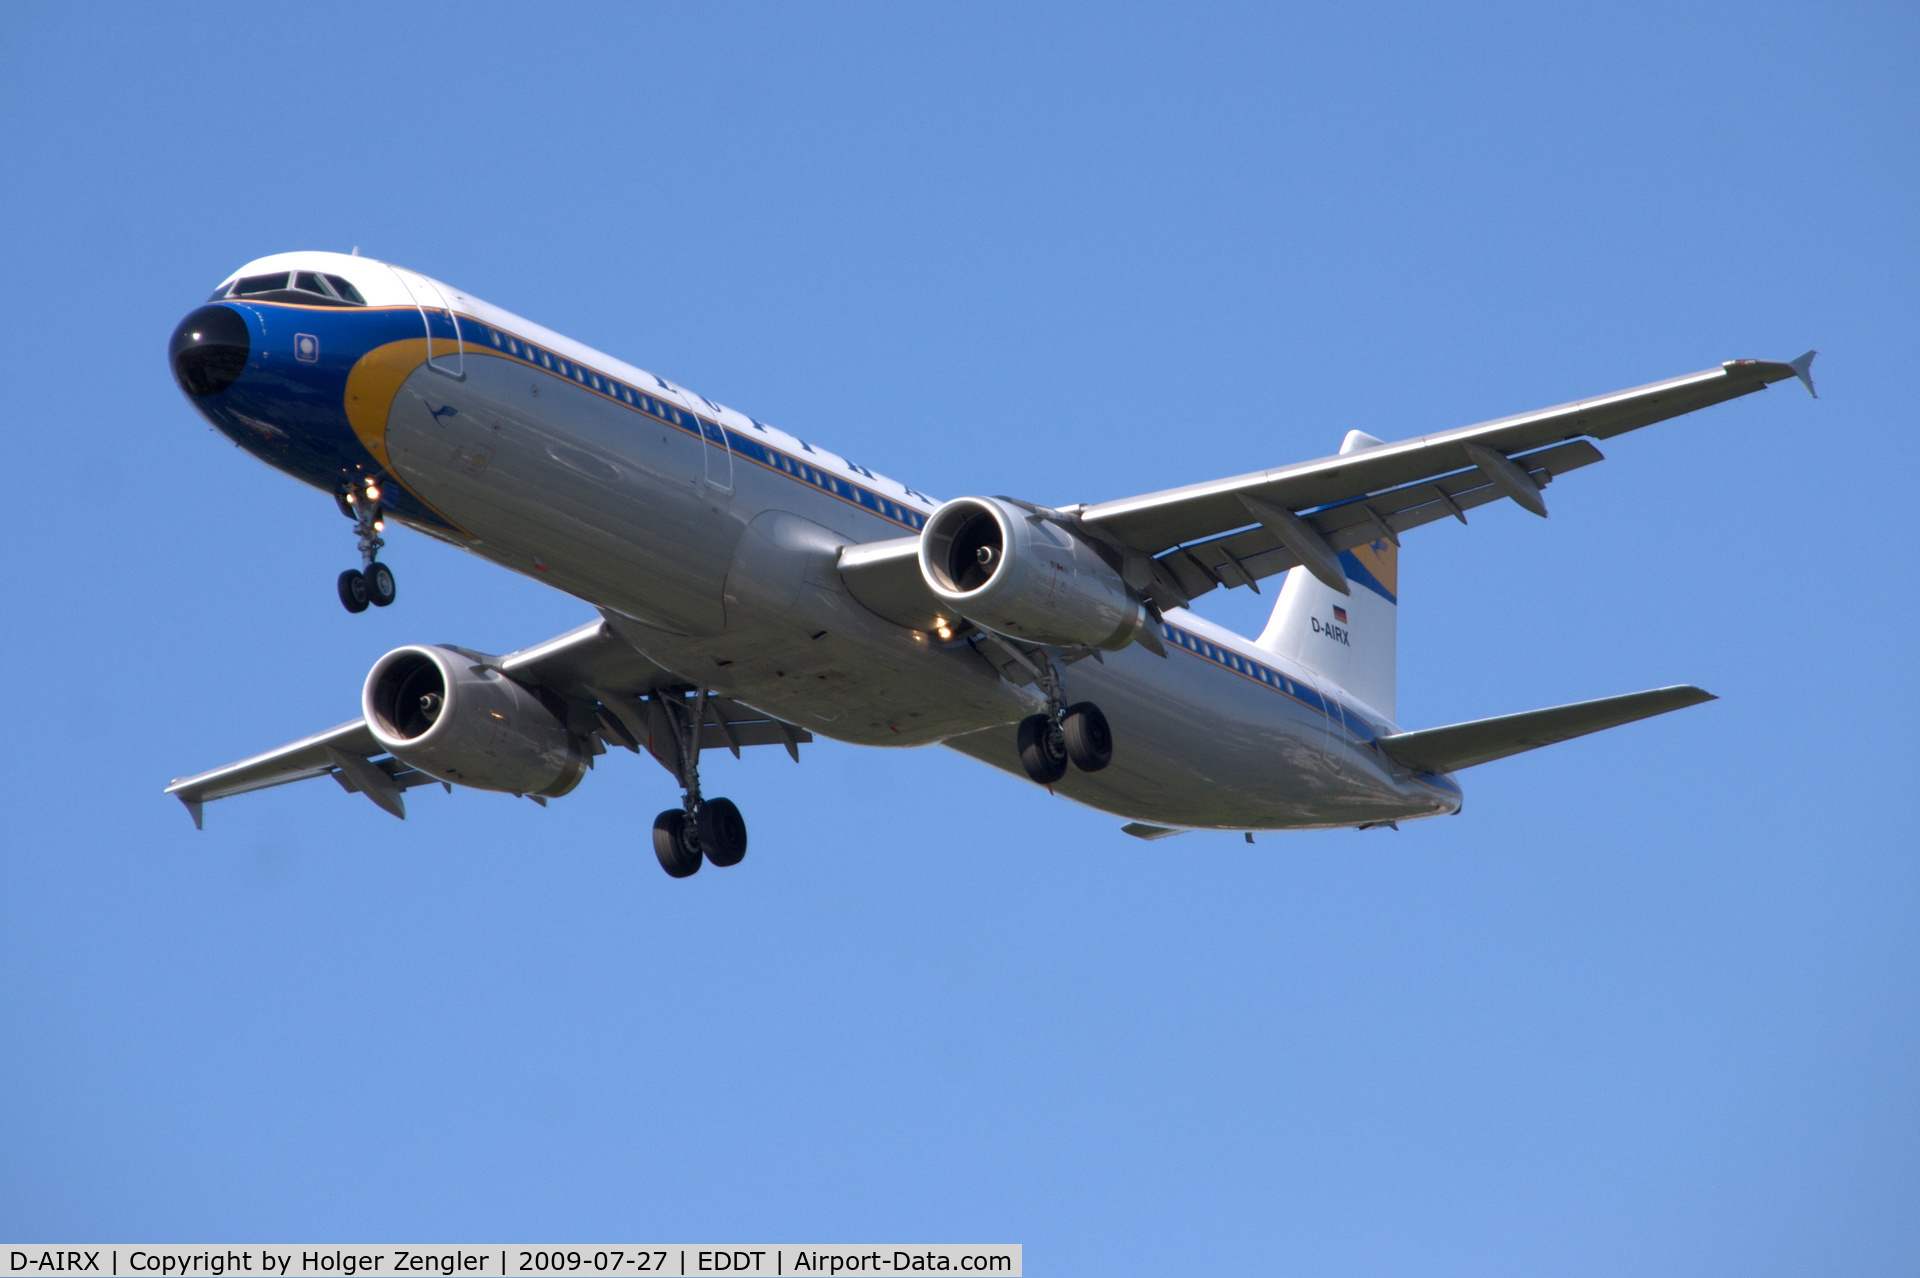 D-AIRX, 1998 Airbus A321-131 C/N 0887, LUFTHANSA Airbus of today in retro colours from yesterday